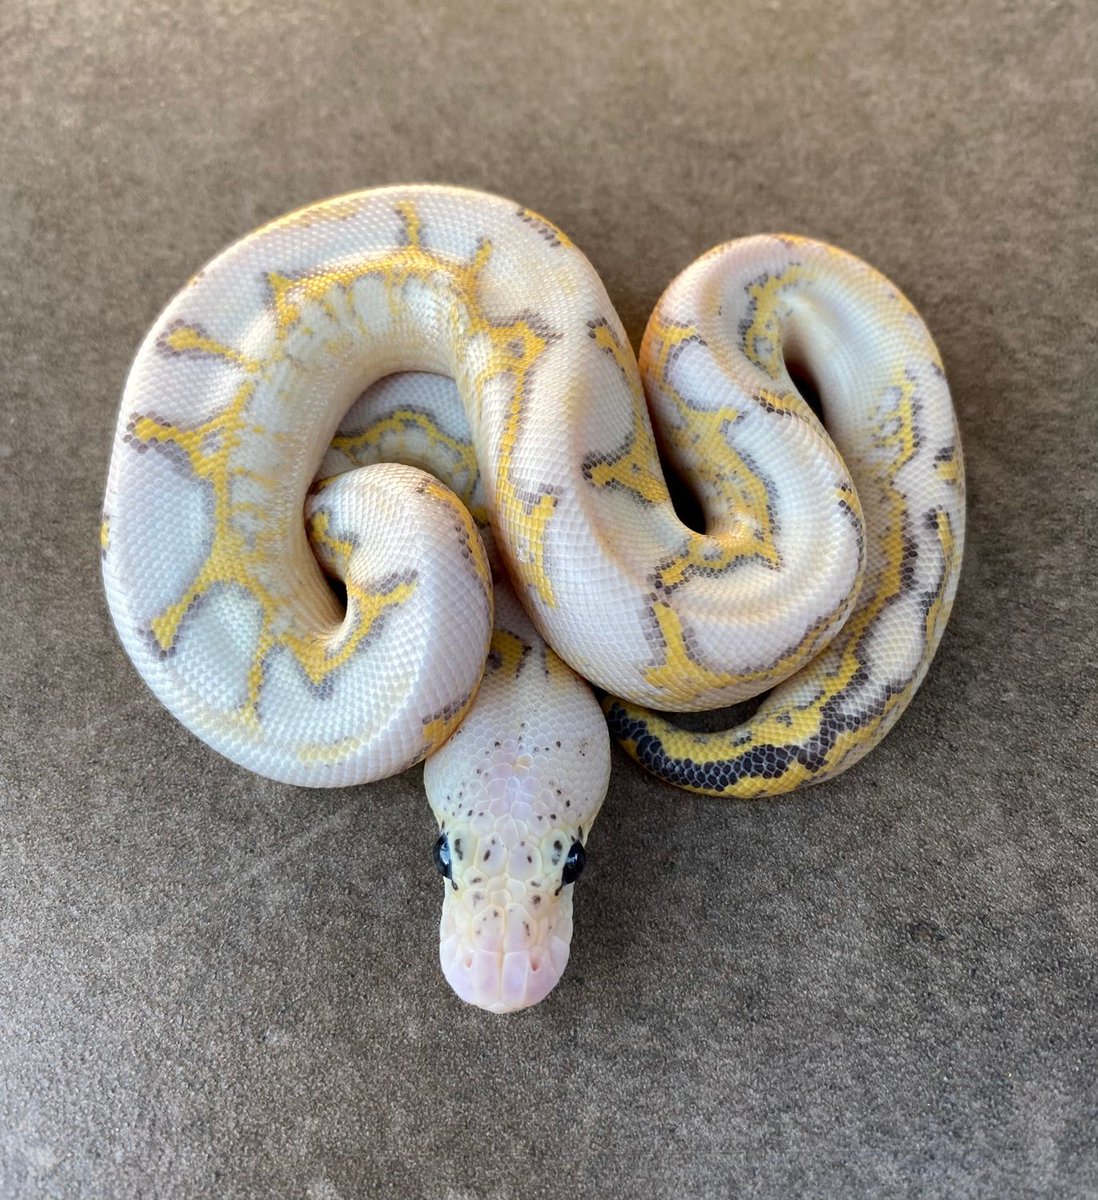 Pastel Highway Clown Ball Python by Goldenboy Reptiles https://buff.ly/3vVw...